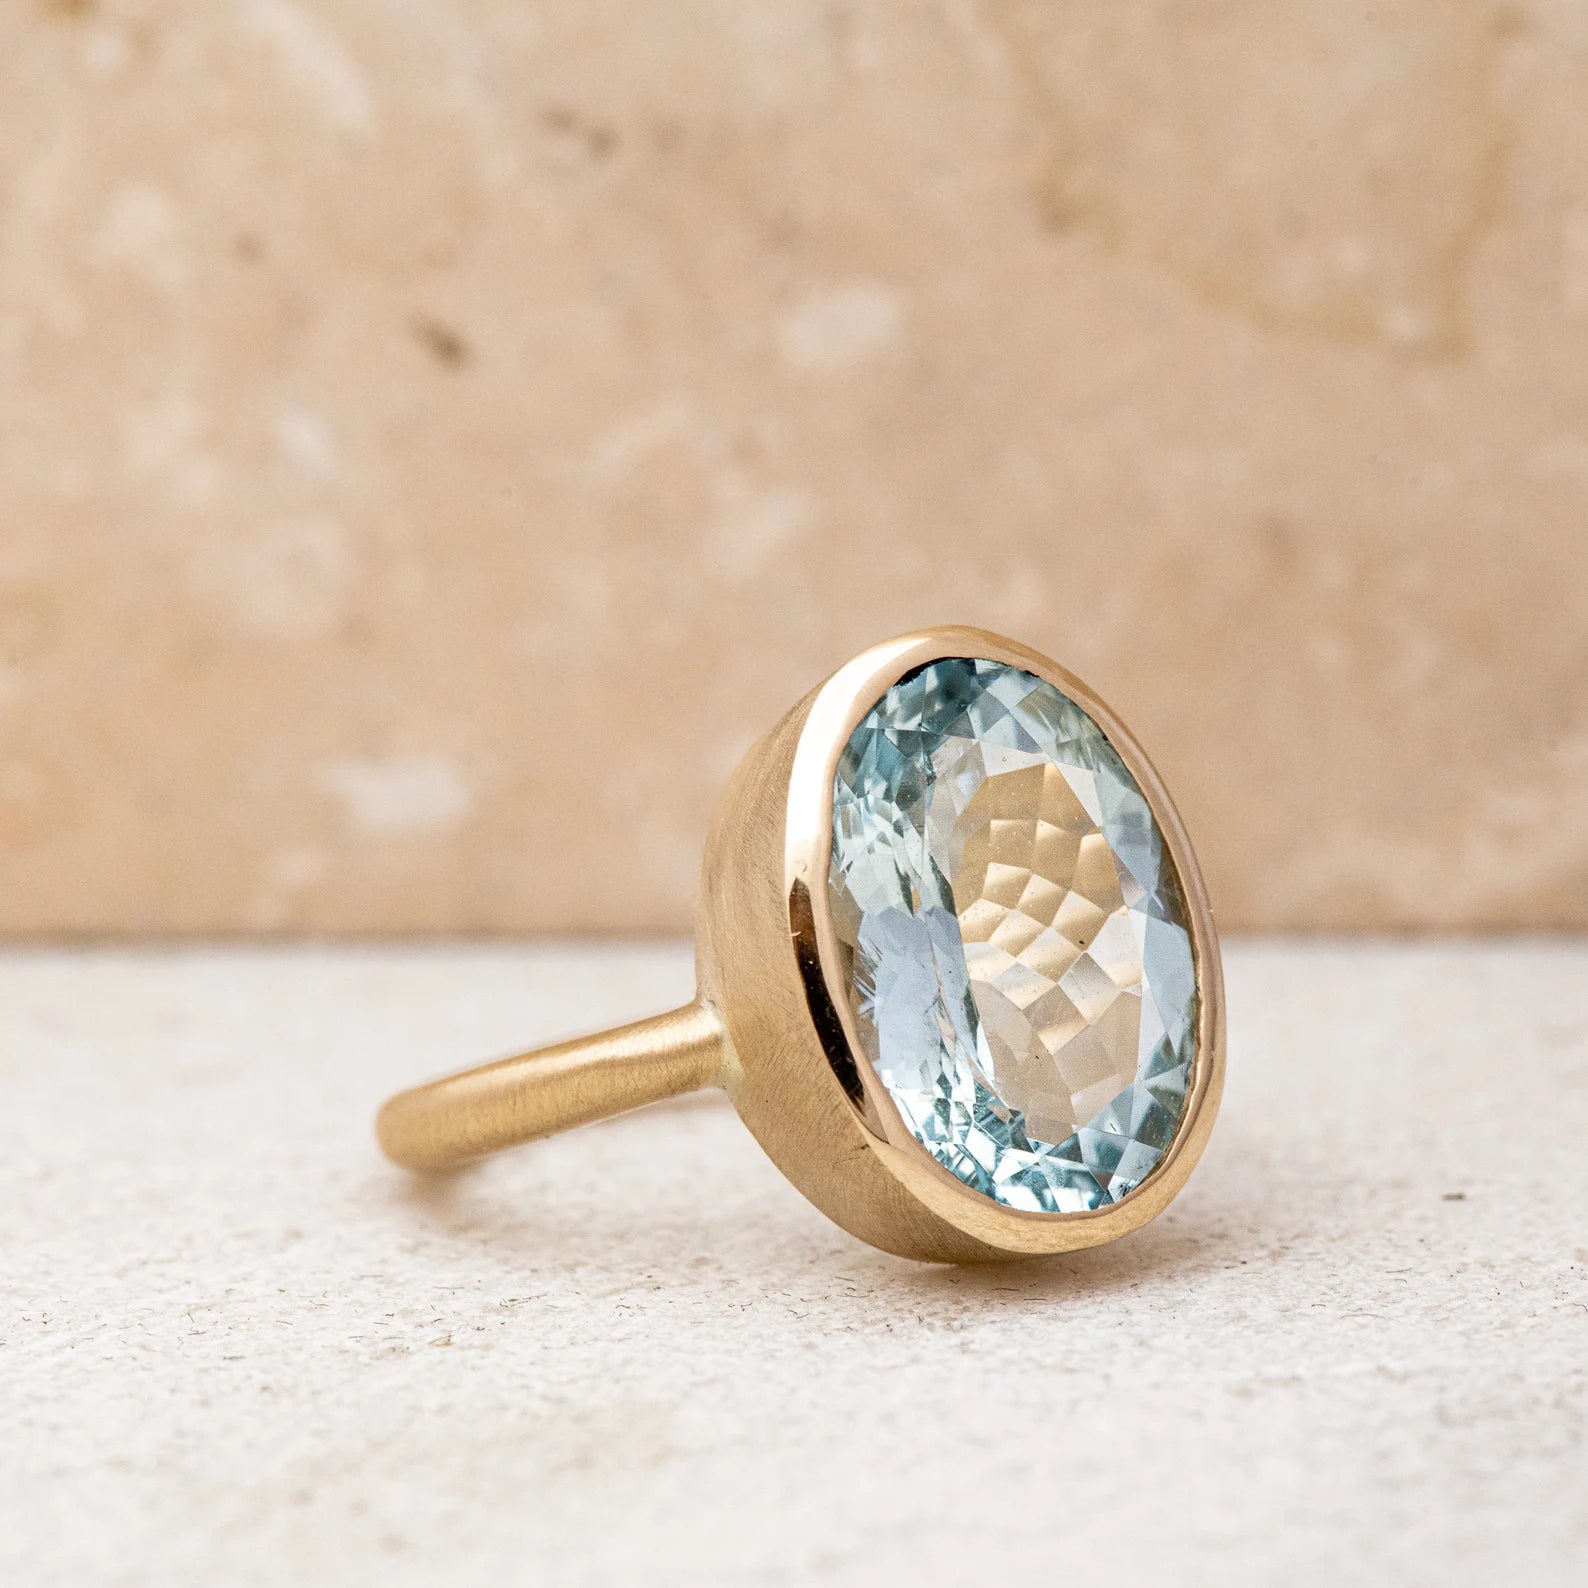 A Large Oval Aquamarine Ring in Yellow Gold with a blue topaz stone, handmade by Cassin Jewelry.